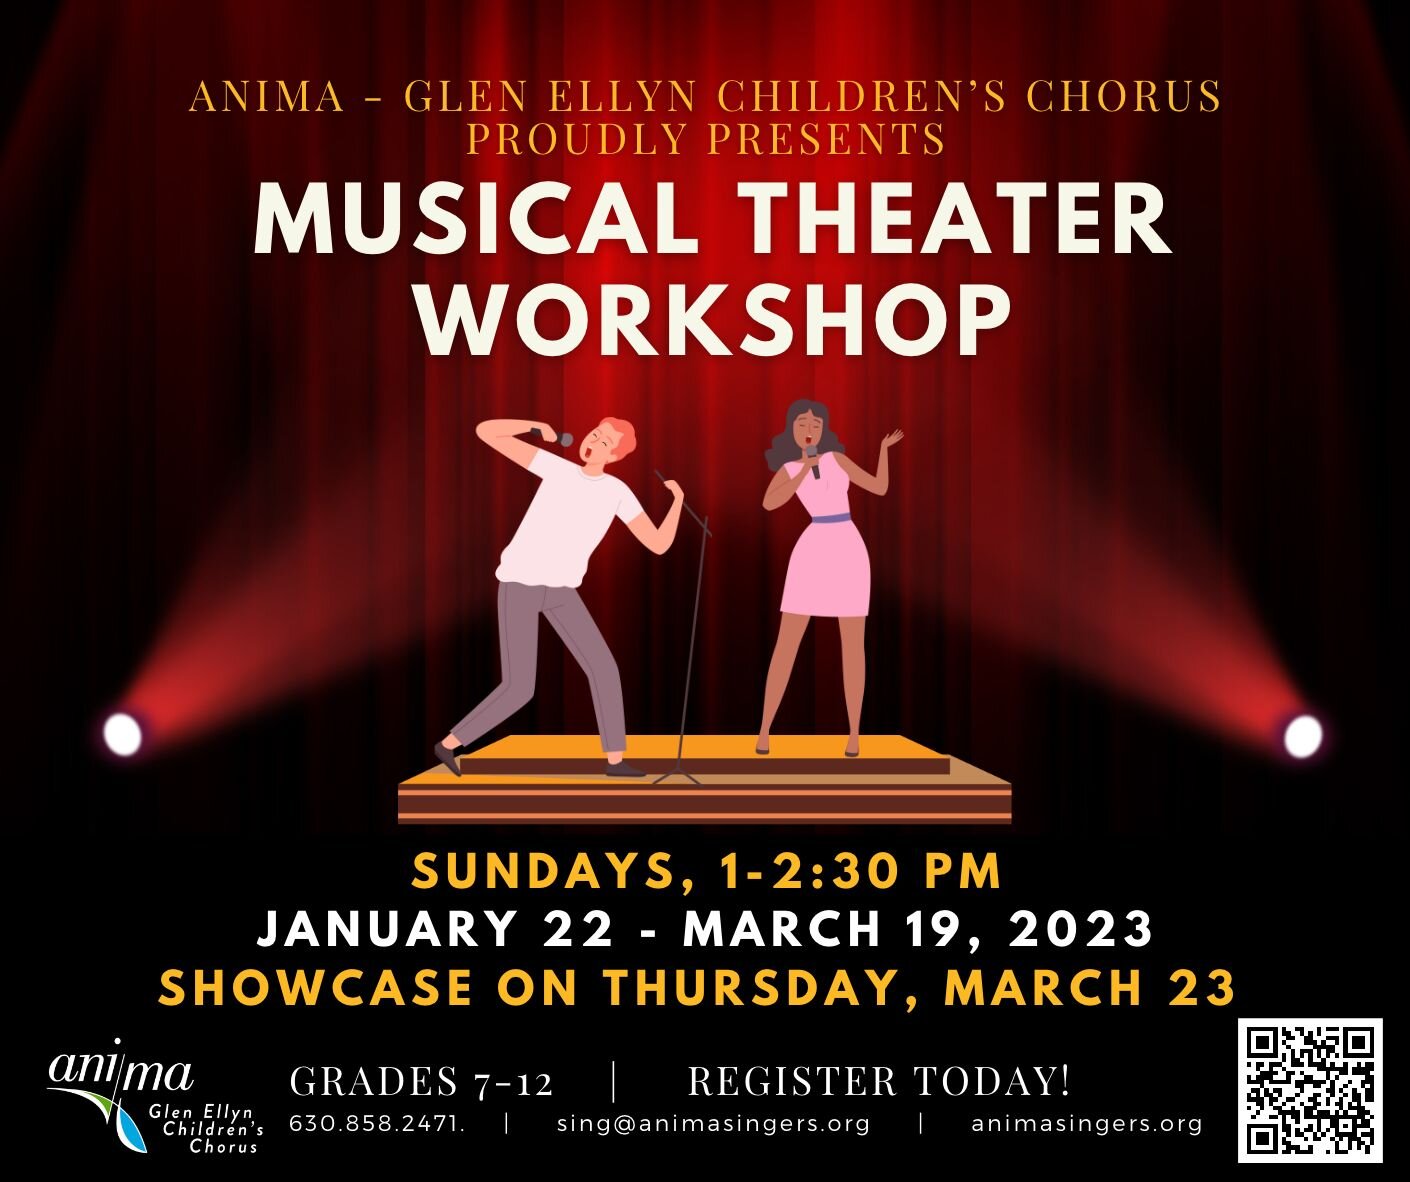 Does your middle school or high school student LOVE musical theater? Last chance to sign up for the musical theater workshop at Anima-GECC! Only 5 spots left! Link in bio.